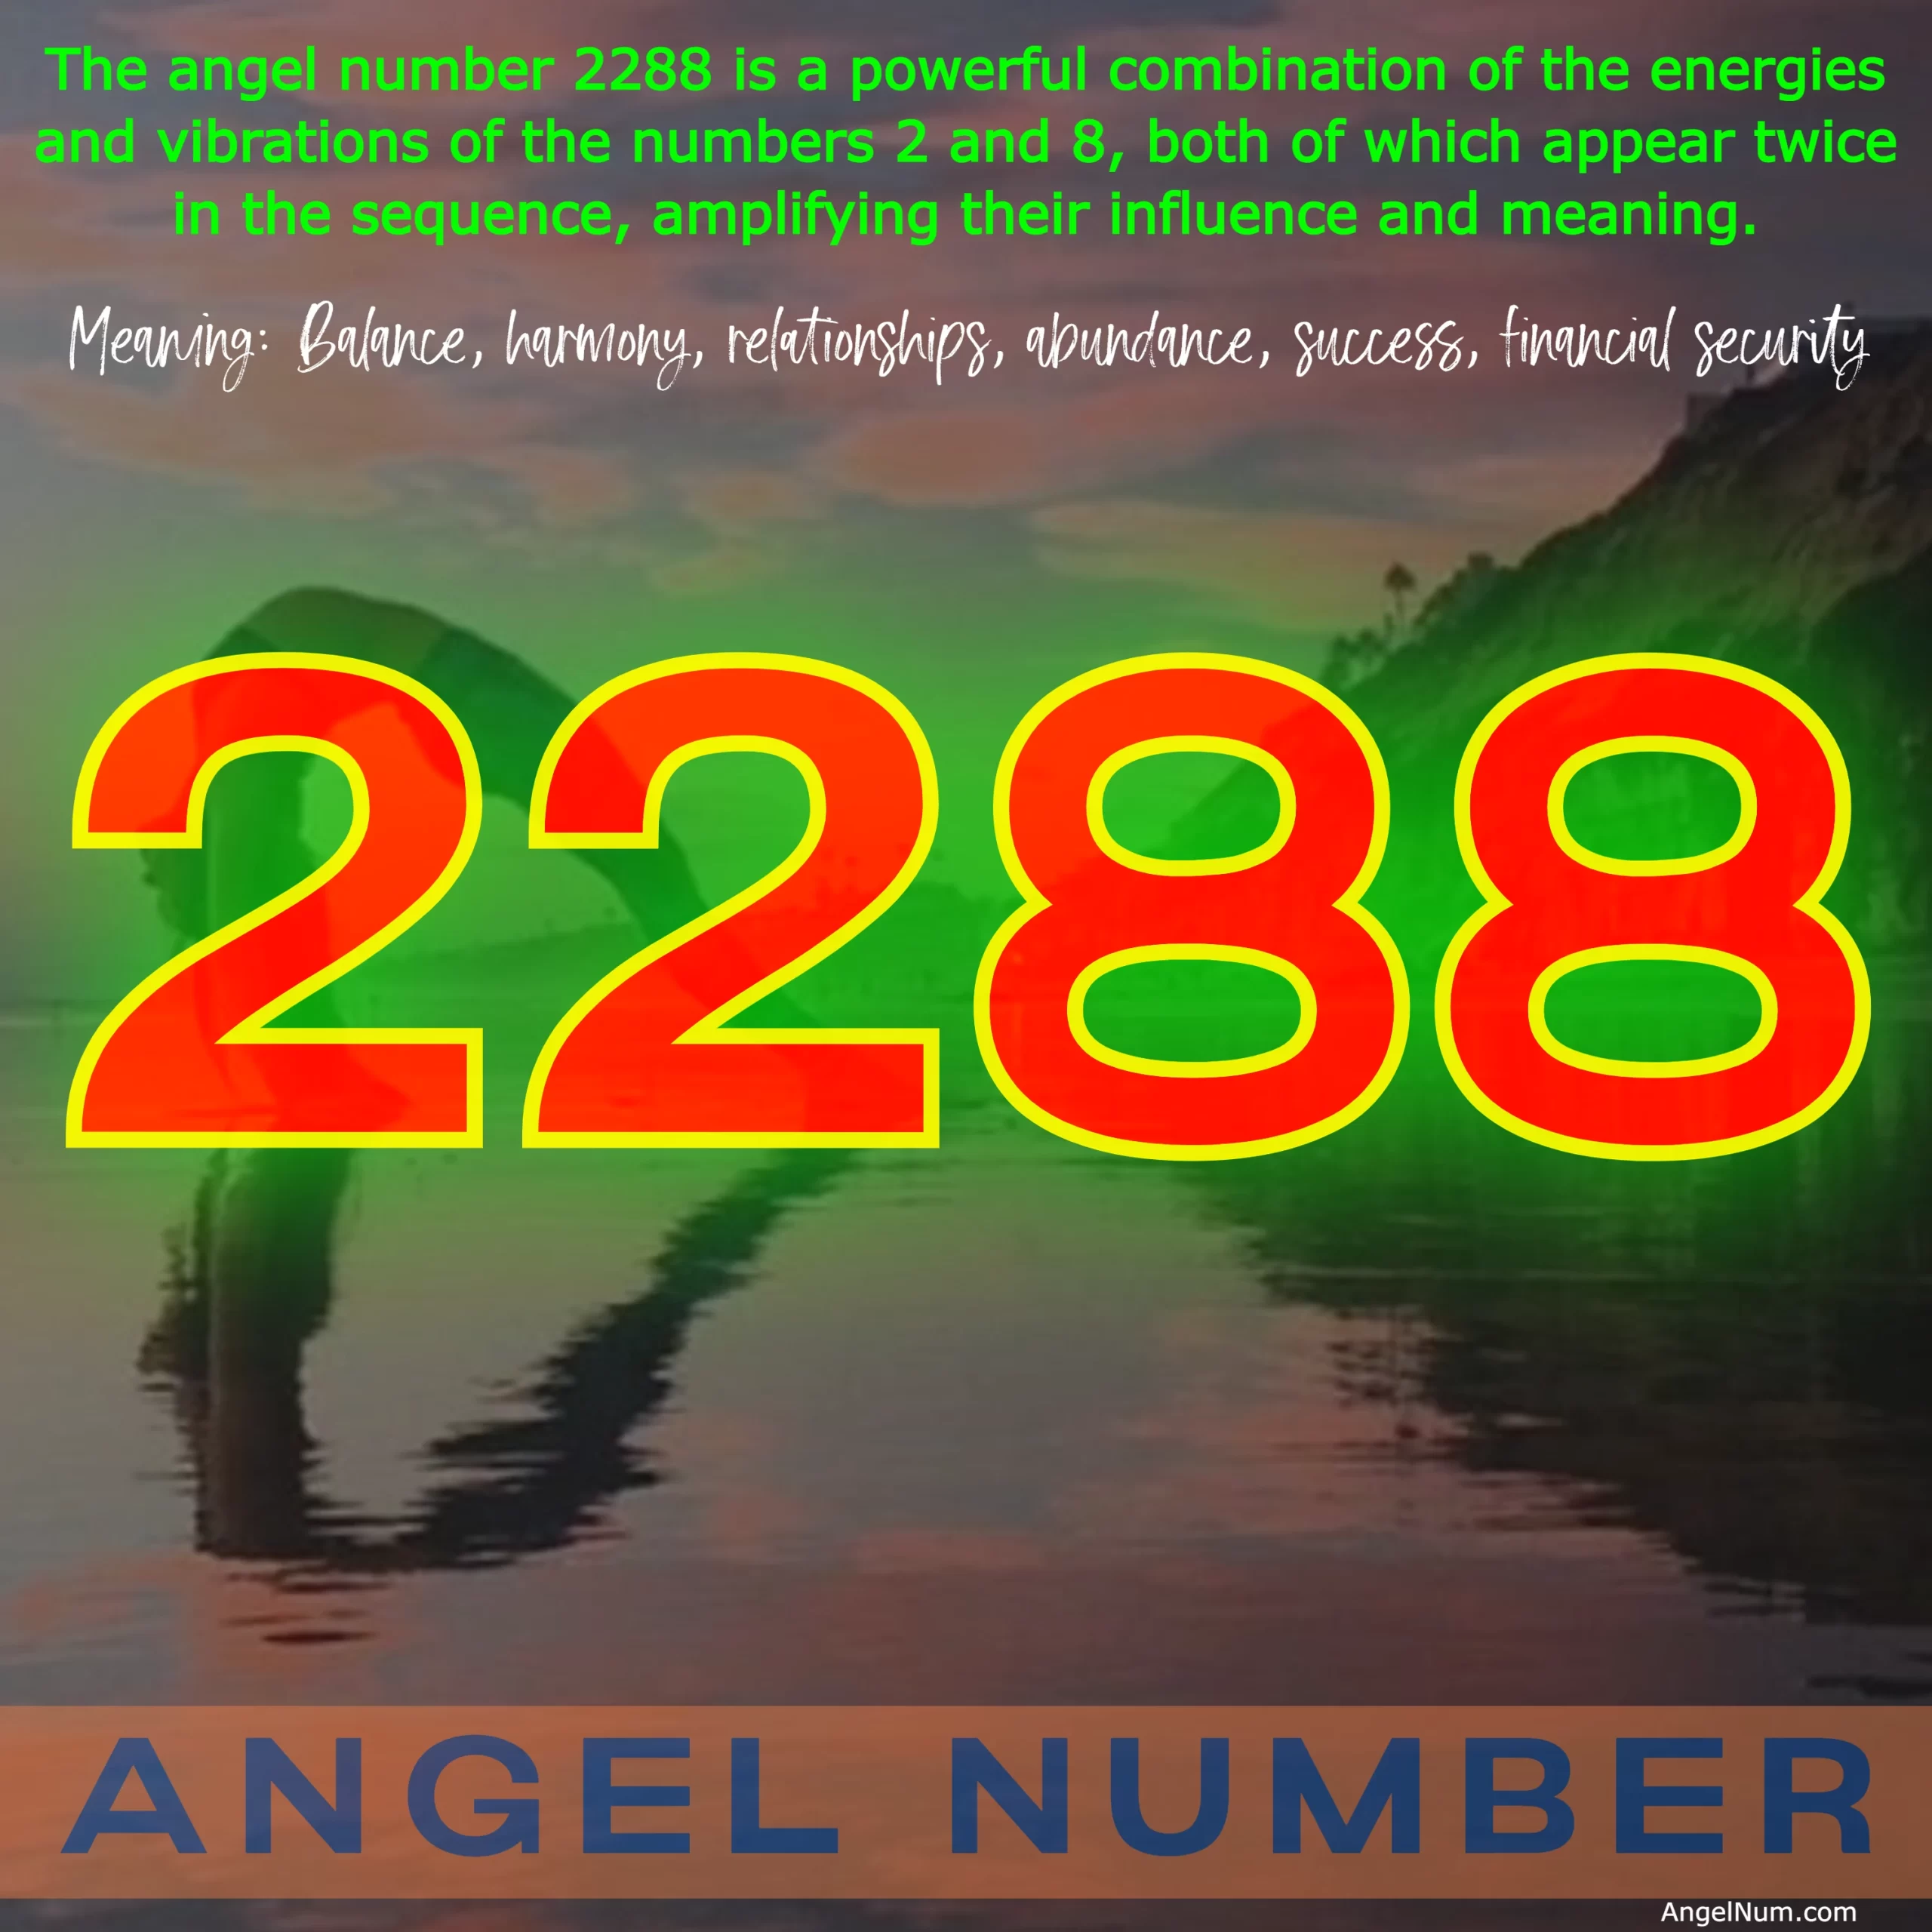 Angel Number 2288: Meaning, Symbolism, and Significance